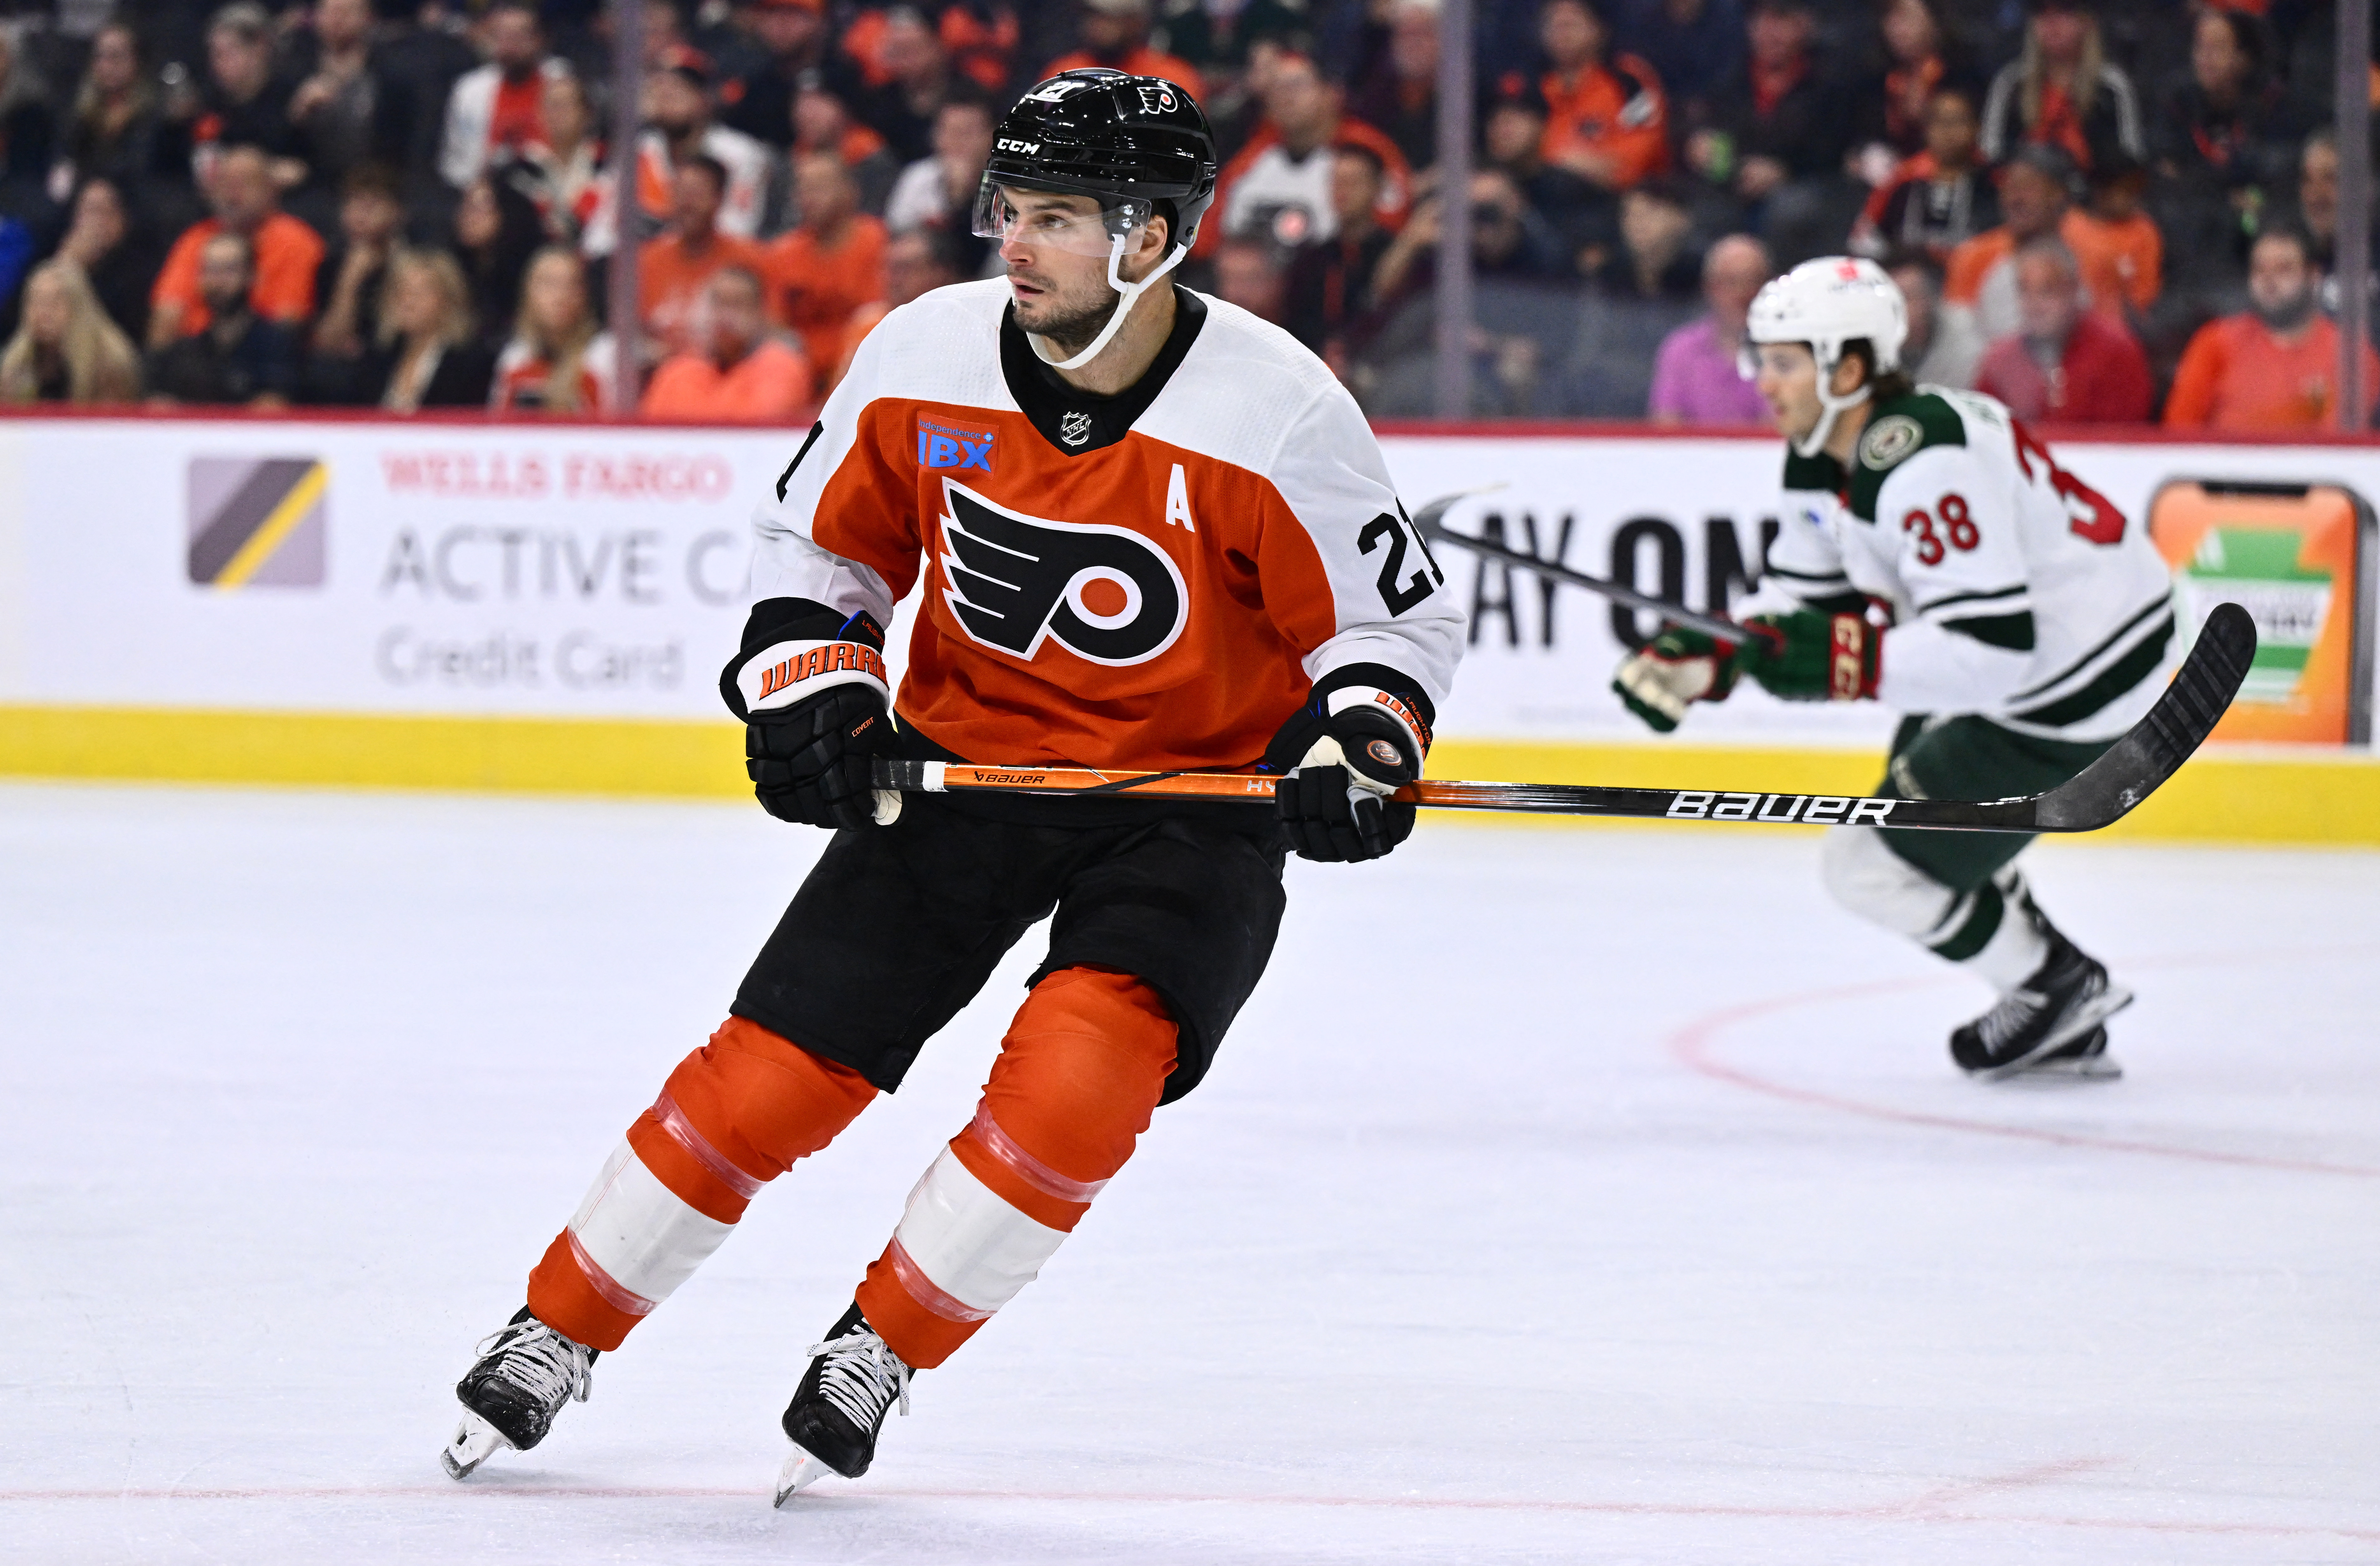 NHL Network on X: The Flyers already have some key pieces but new